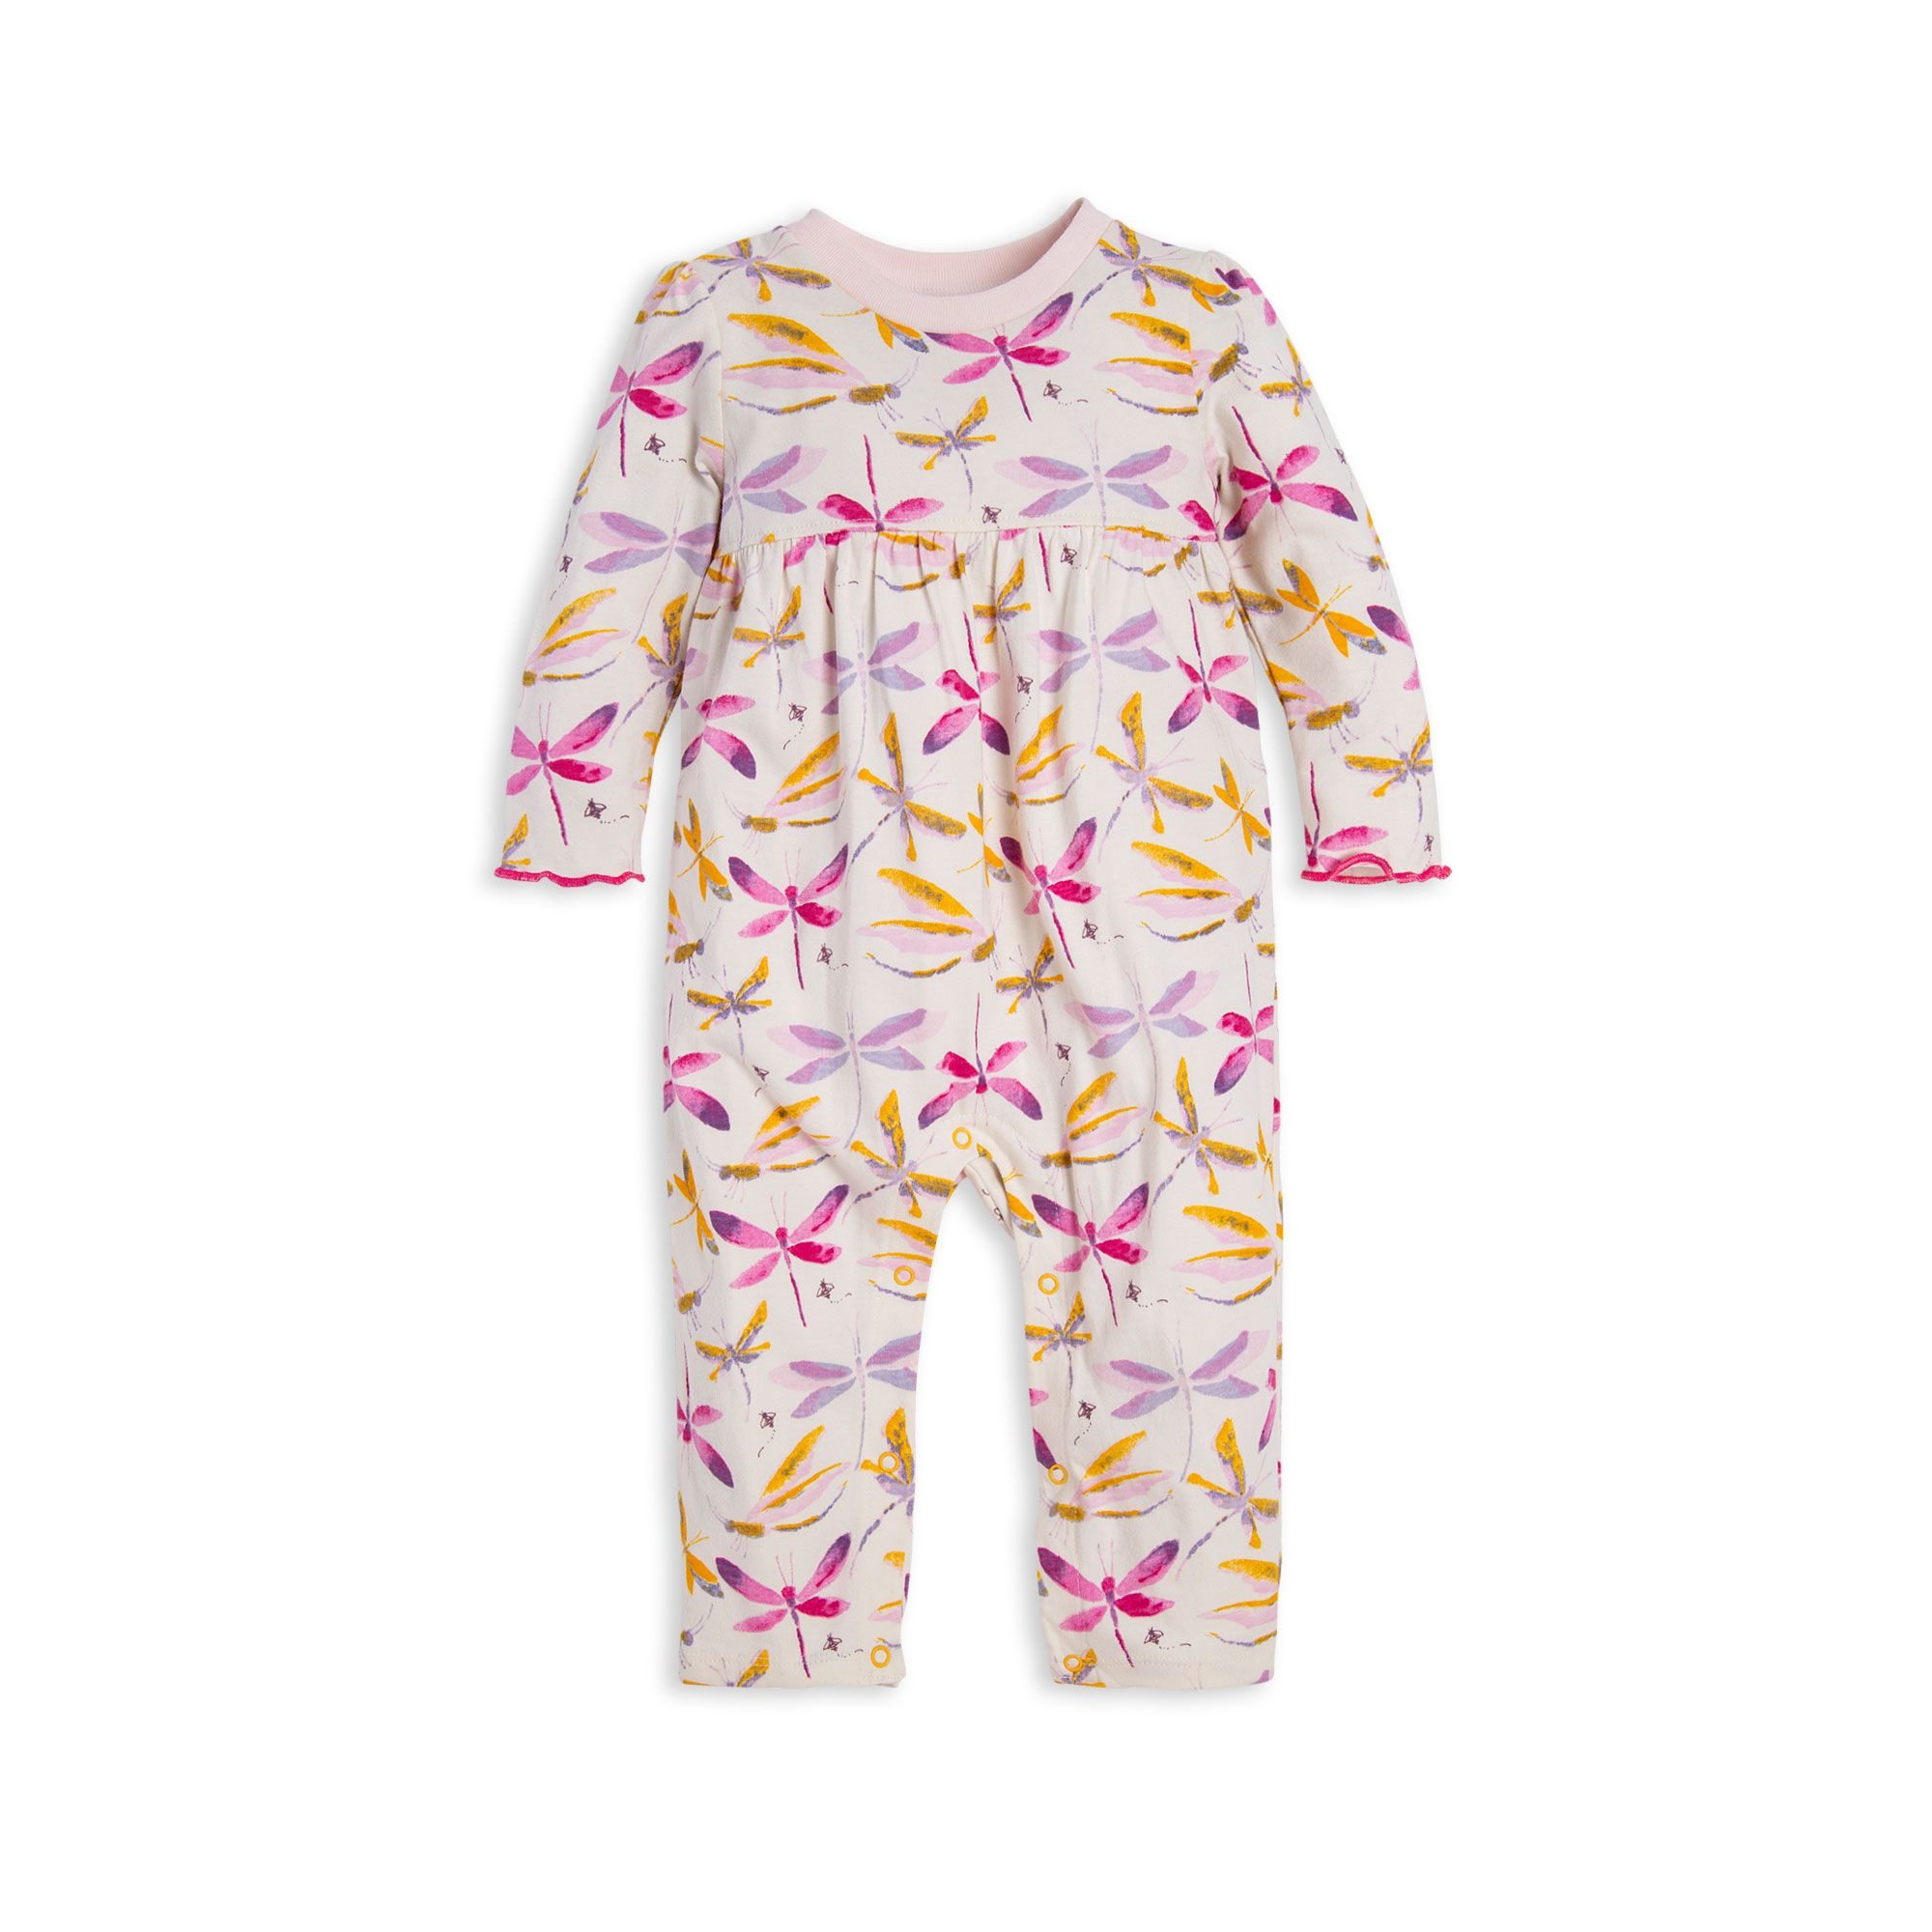 Autumn Sky Dragonfly Organic Baby Jumpsuit